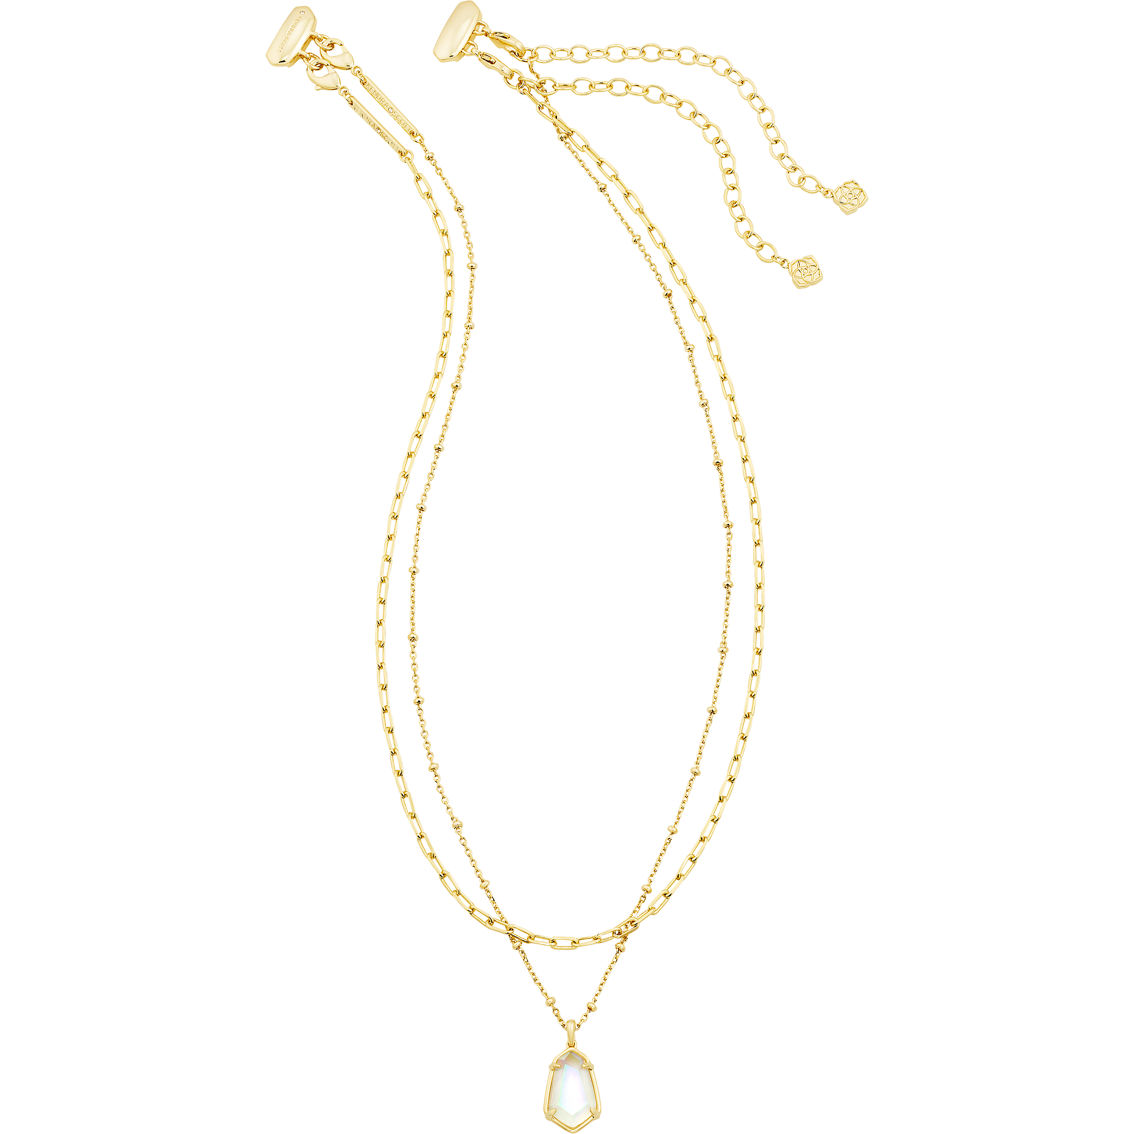 Kendra Scott Alexandria Gold Iridescent Clear Rock Crystal Multi Strand Necklace - Image 2 of 2